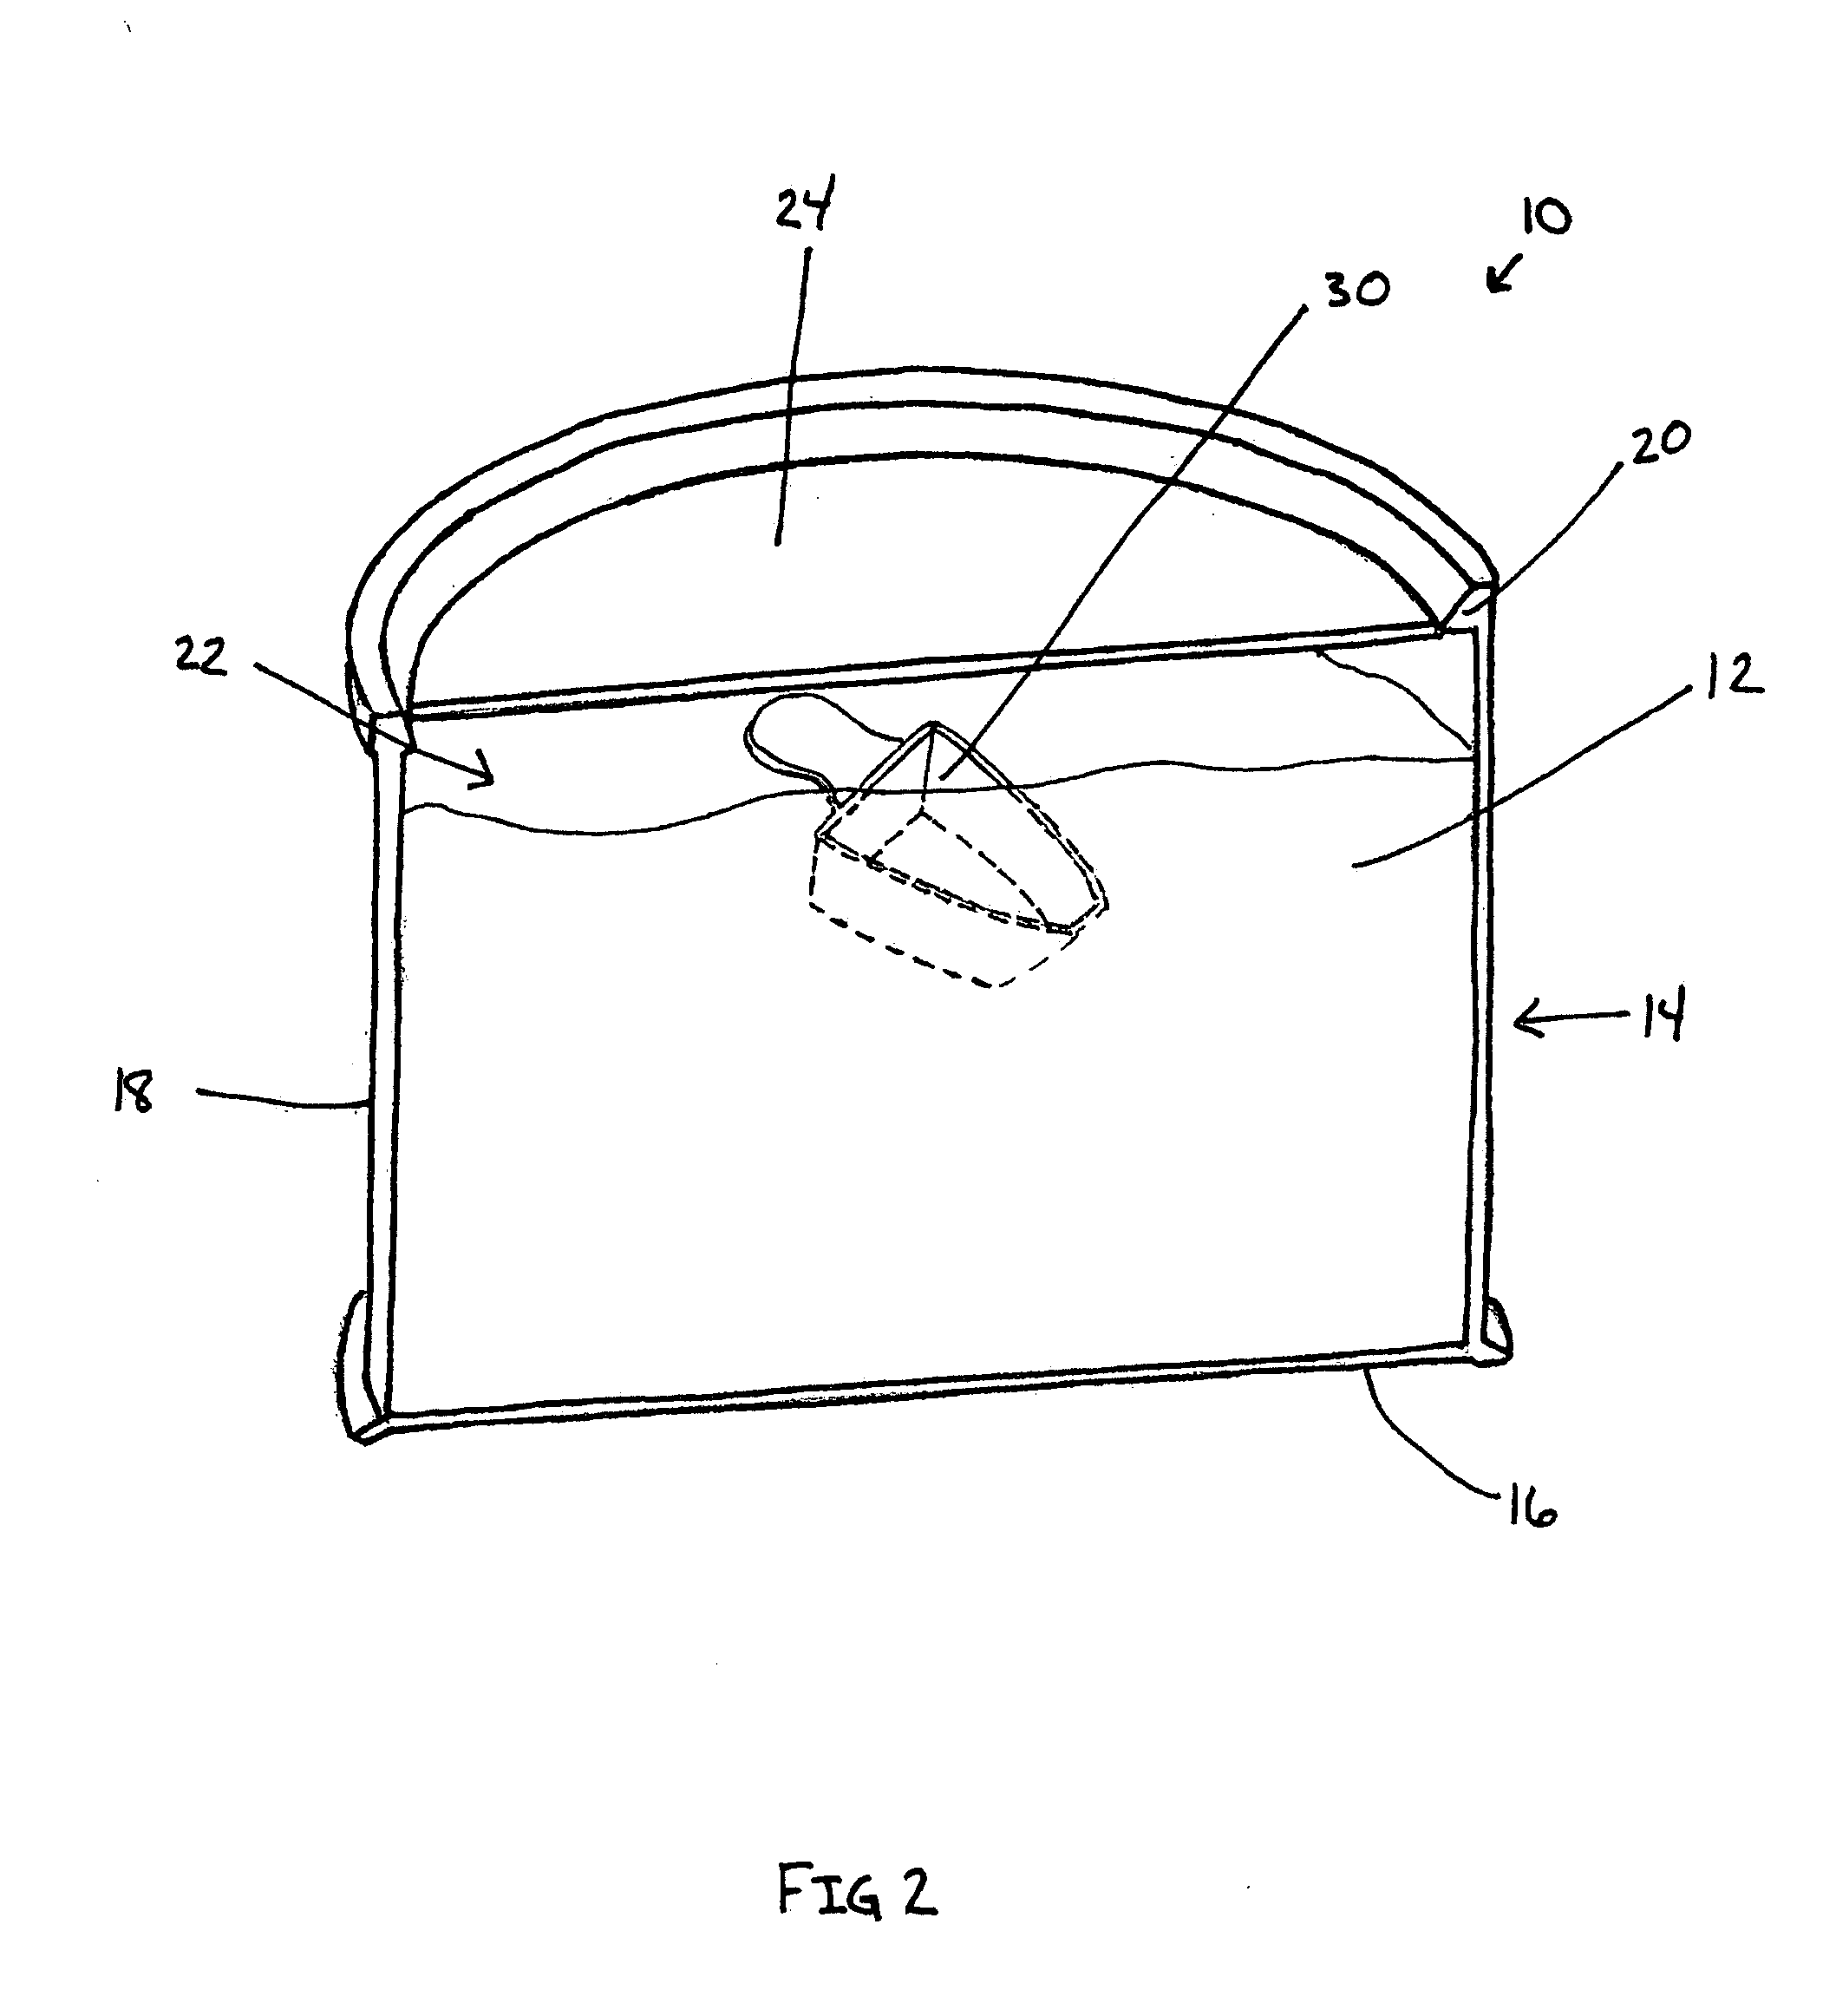 Scooping device for container having an electromagnetic surveillance device